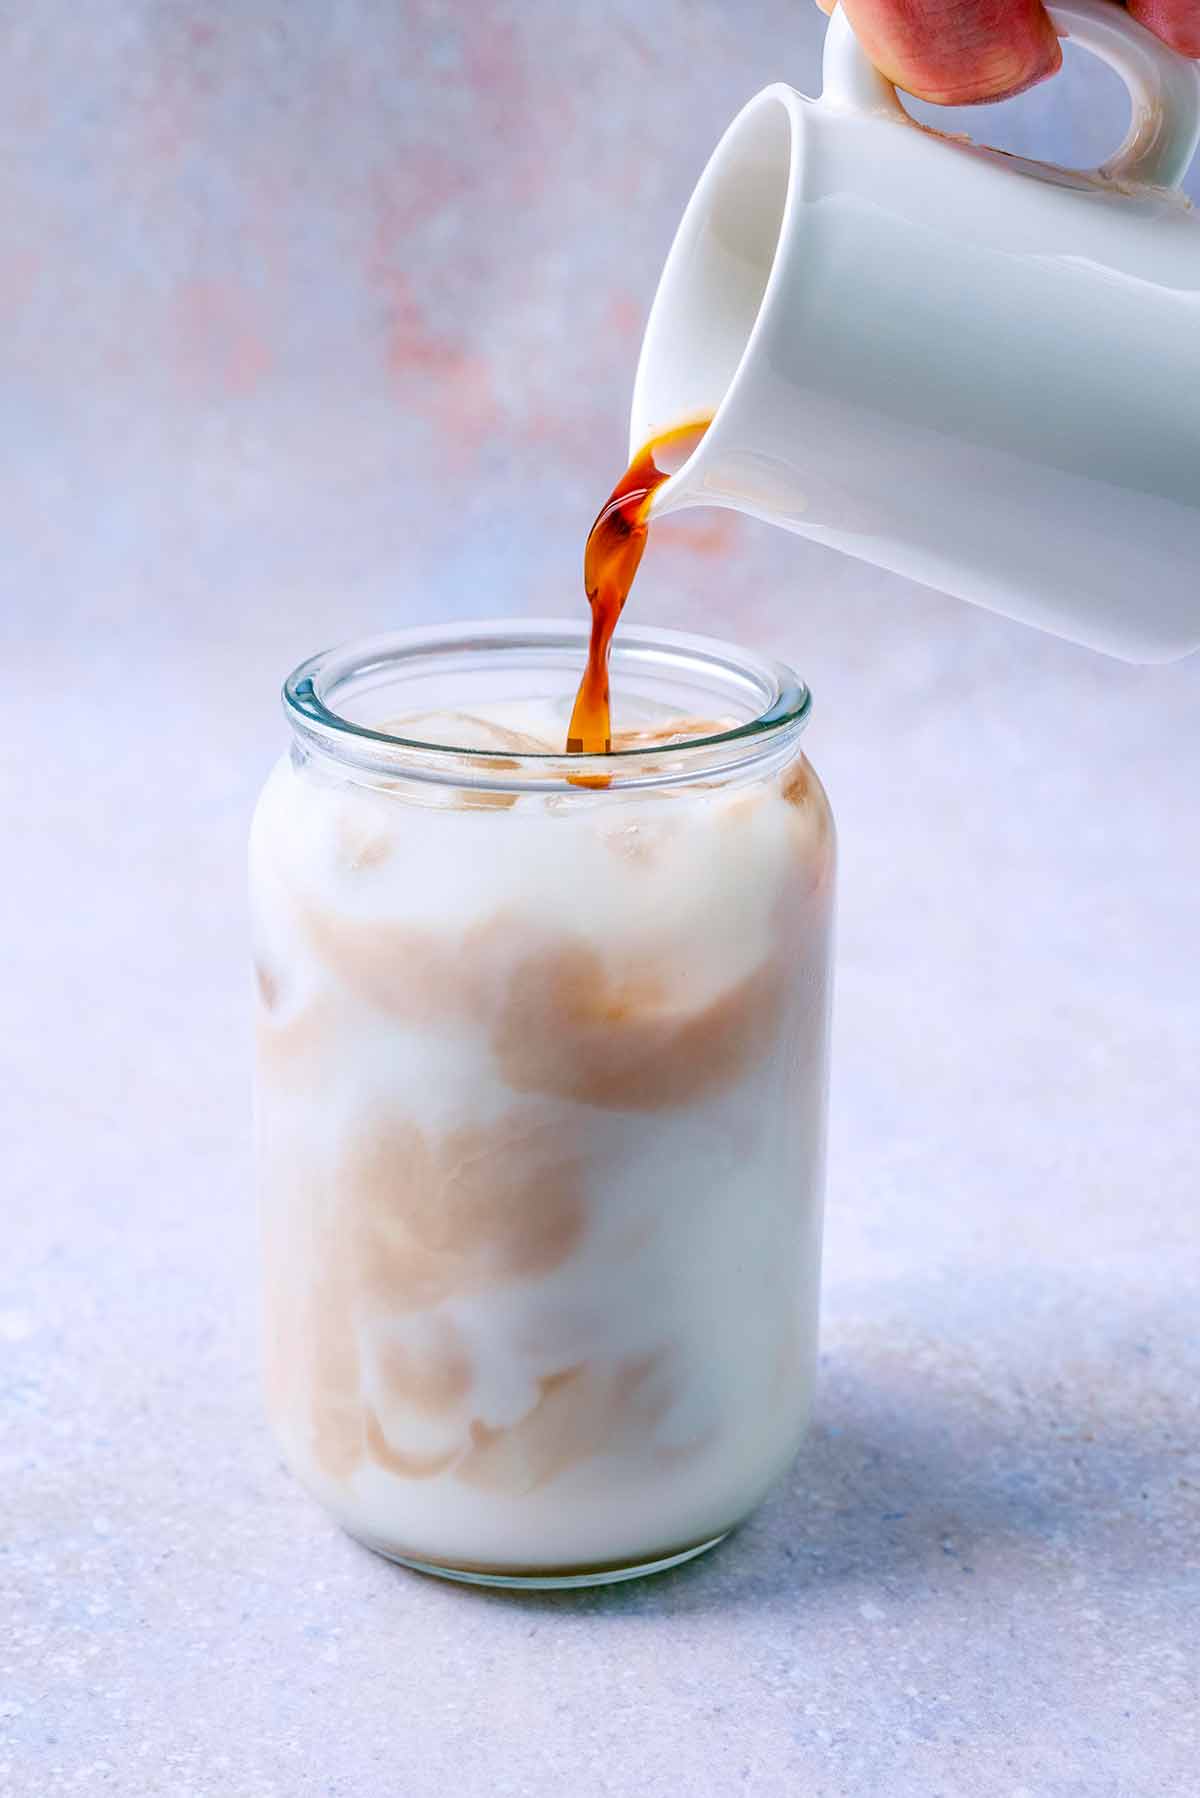 Coffee being poured into iced milk.